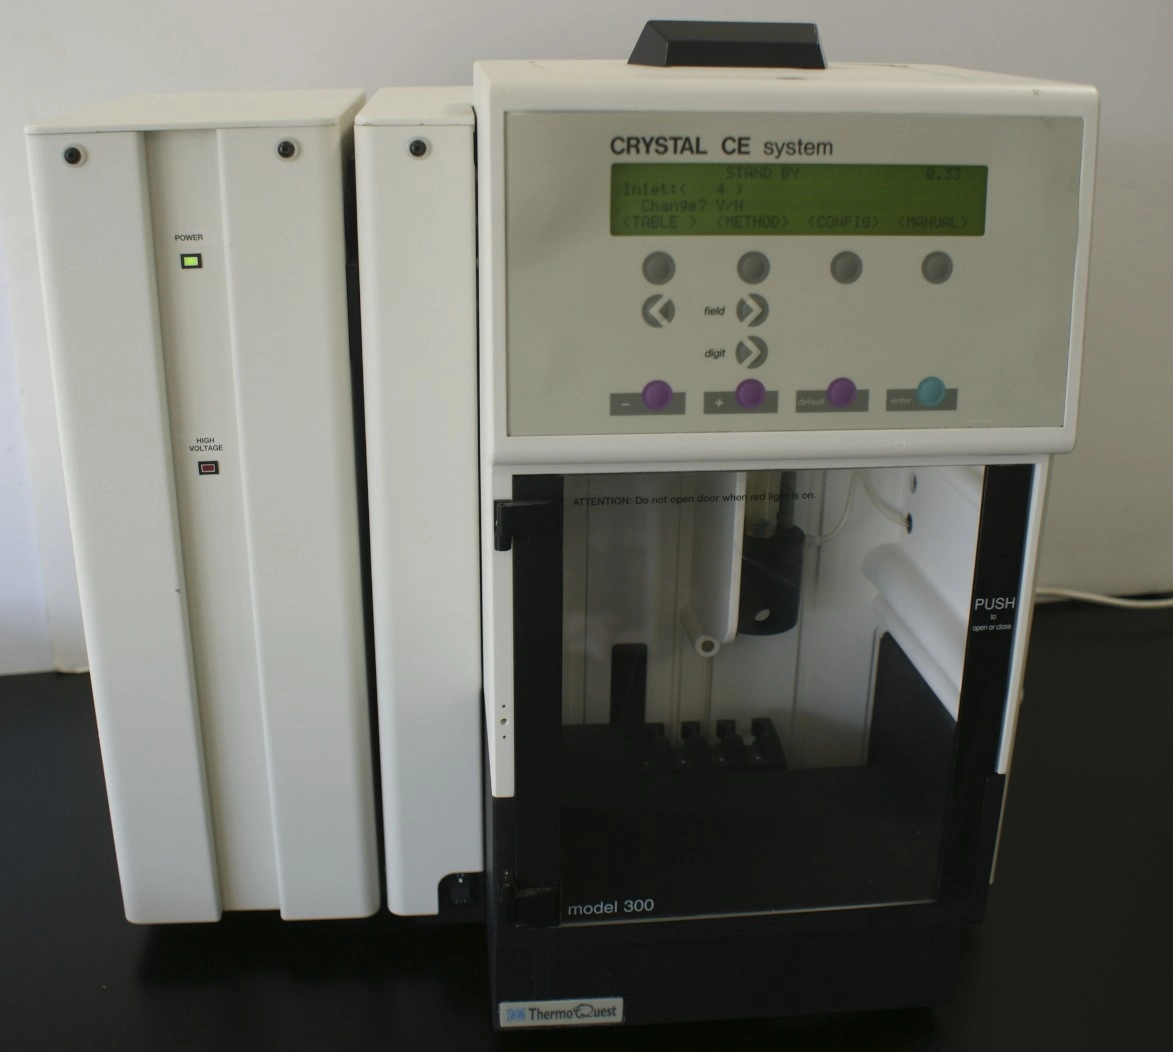 ThermoQuest Model 300 Crystal CE system System ThermoQuest 300 Capillary Electrophoresis System ThermoQuest CRYSTAL CE system